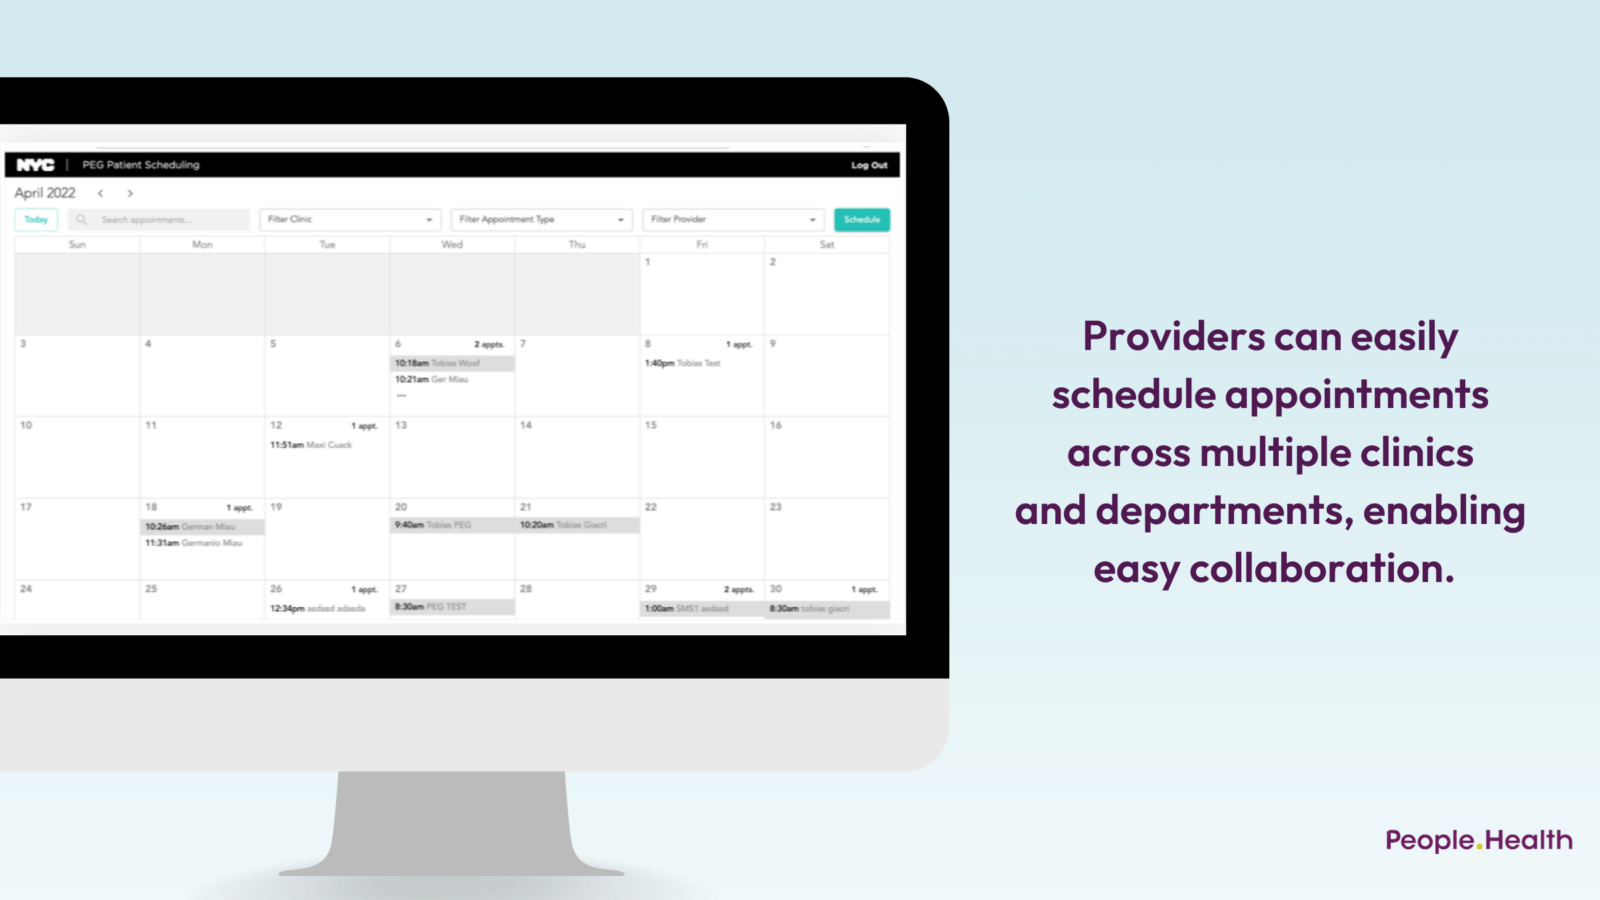 Providers can easily schedule appointments across multiple clinics and departments, enabling easy collaboration.